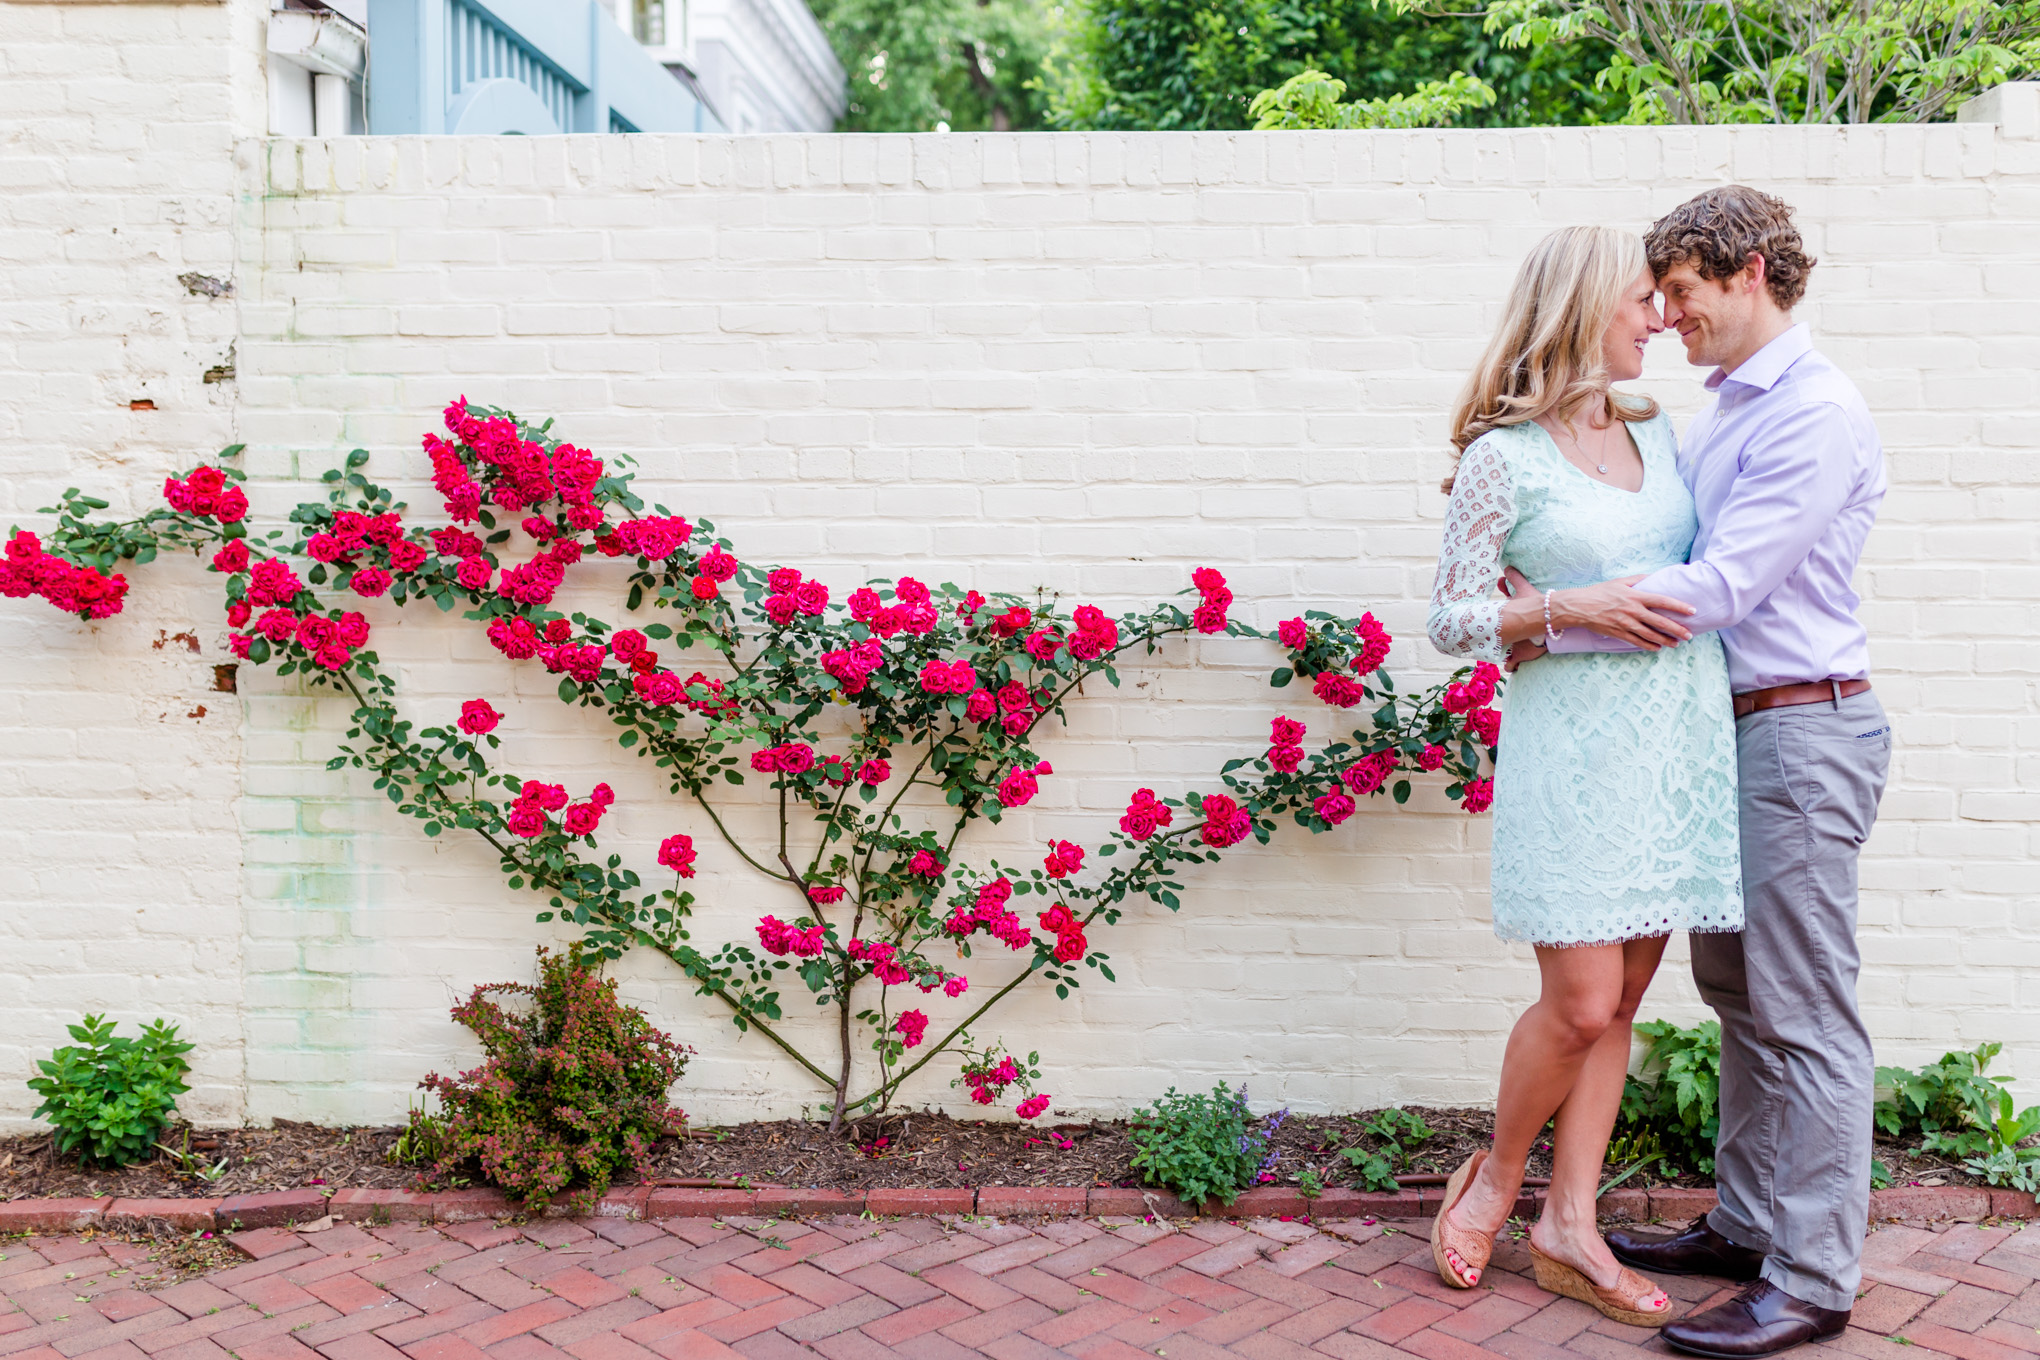 Georgetown maternity photos, pink roses, married couple, spring 2017, spring, Georgetown, D.C.